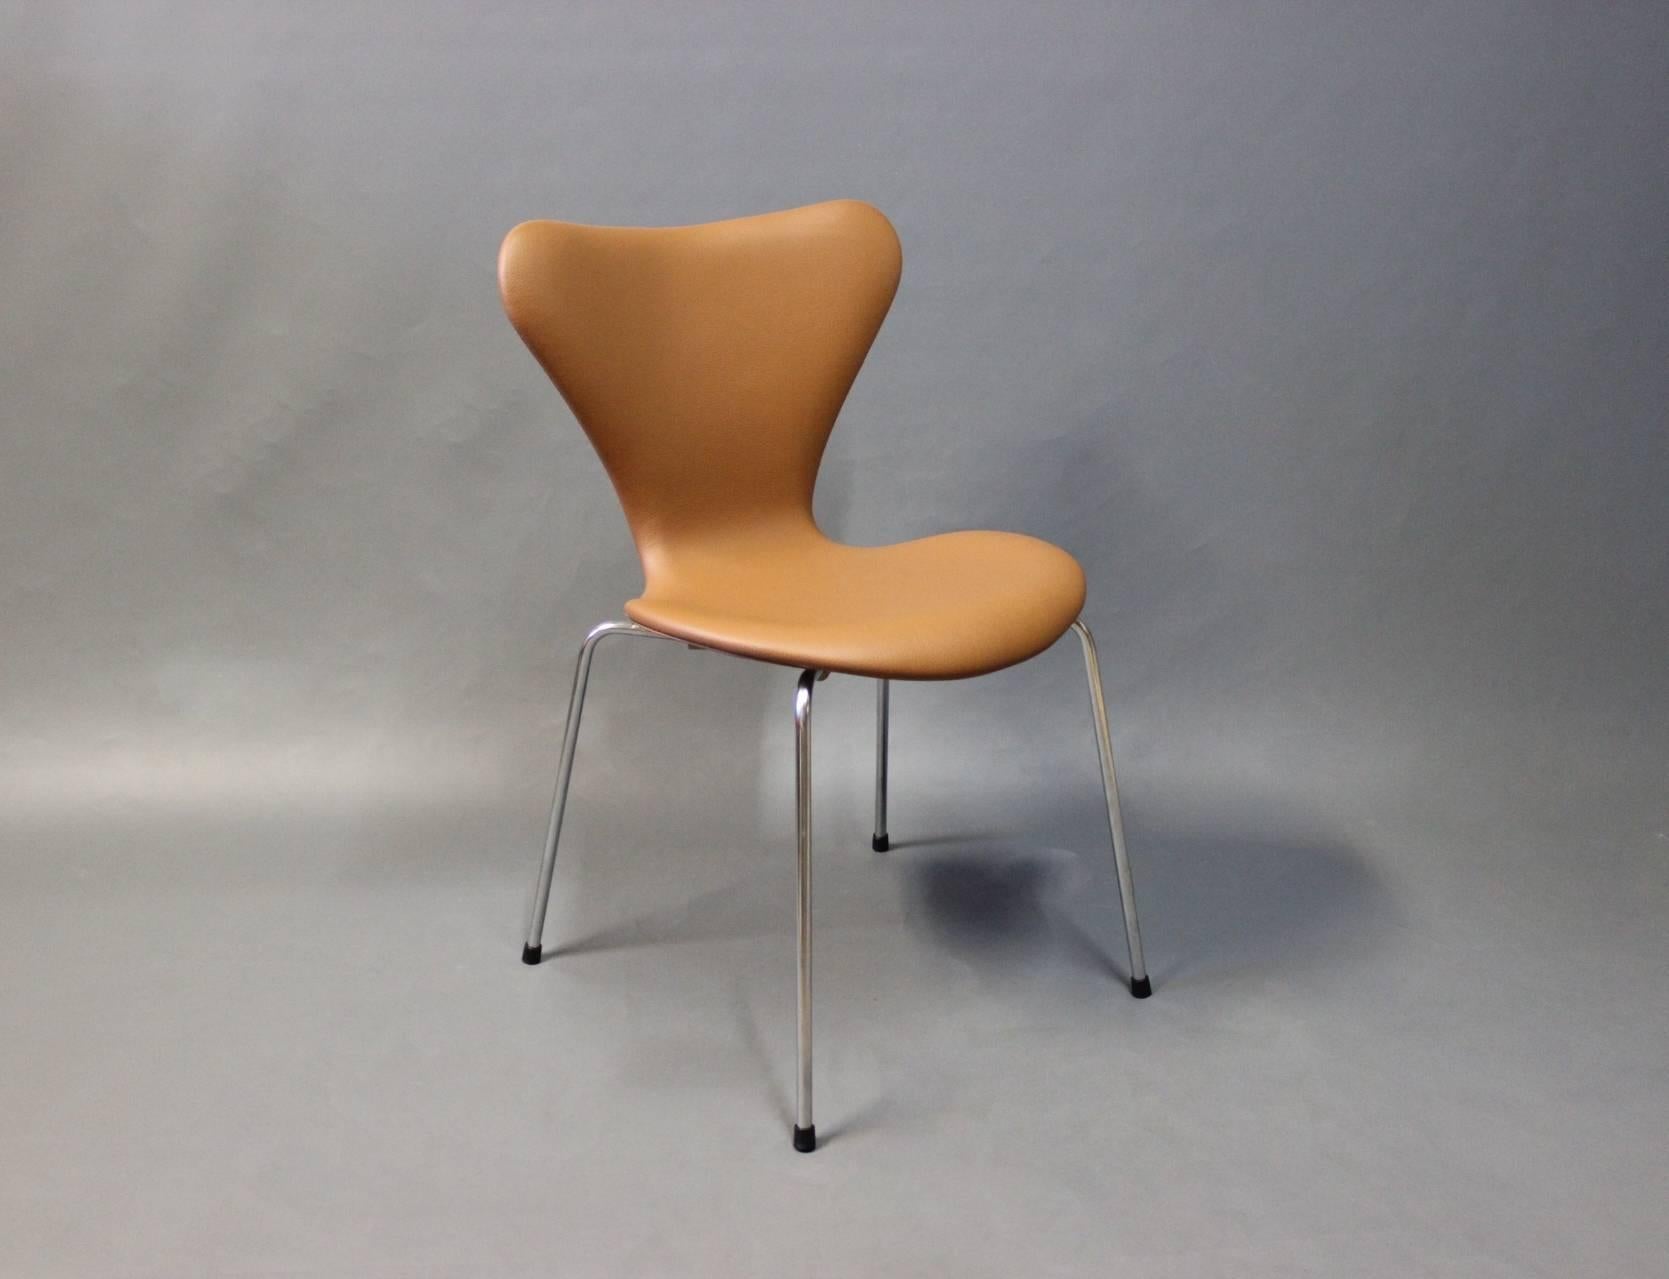 Mid-20th Century Set of Six Chairs Series 7 Chairs, Model 3107, by Arne Jacobsen and Fritz Hansen